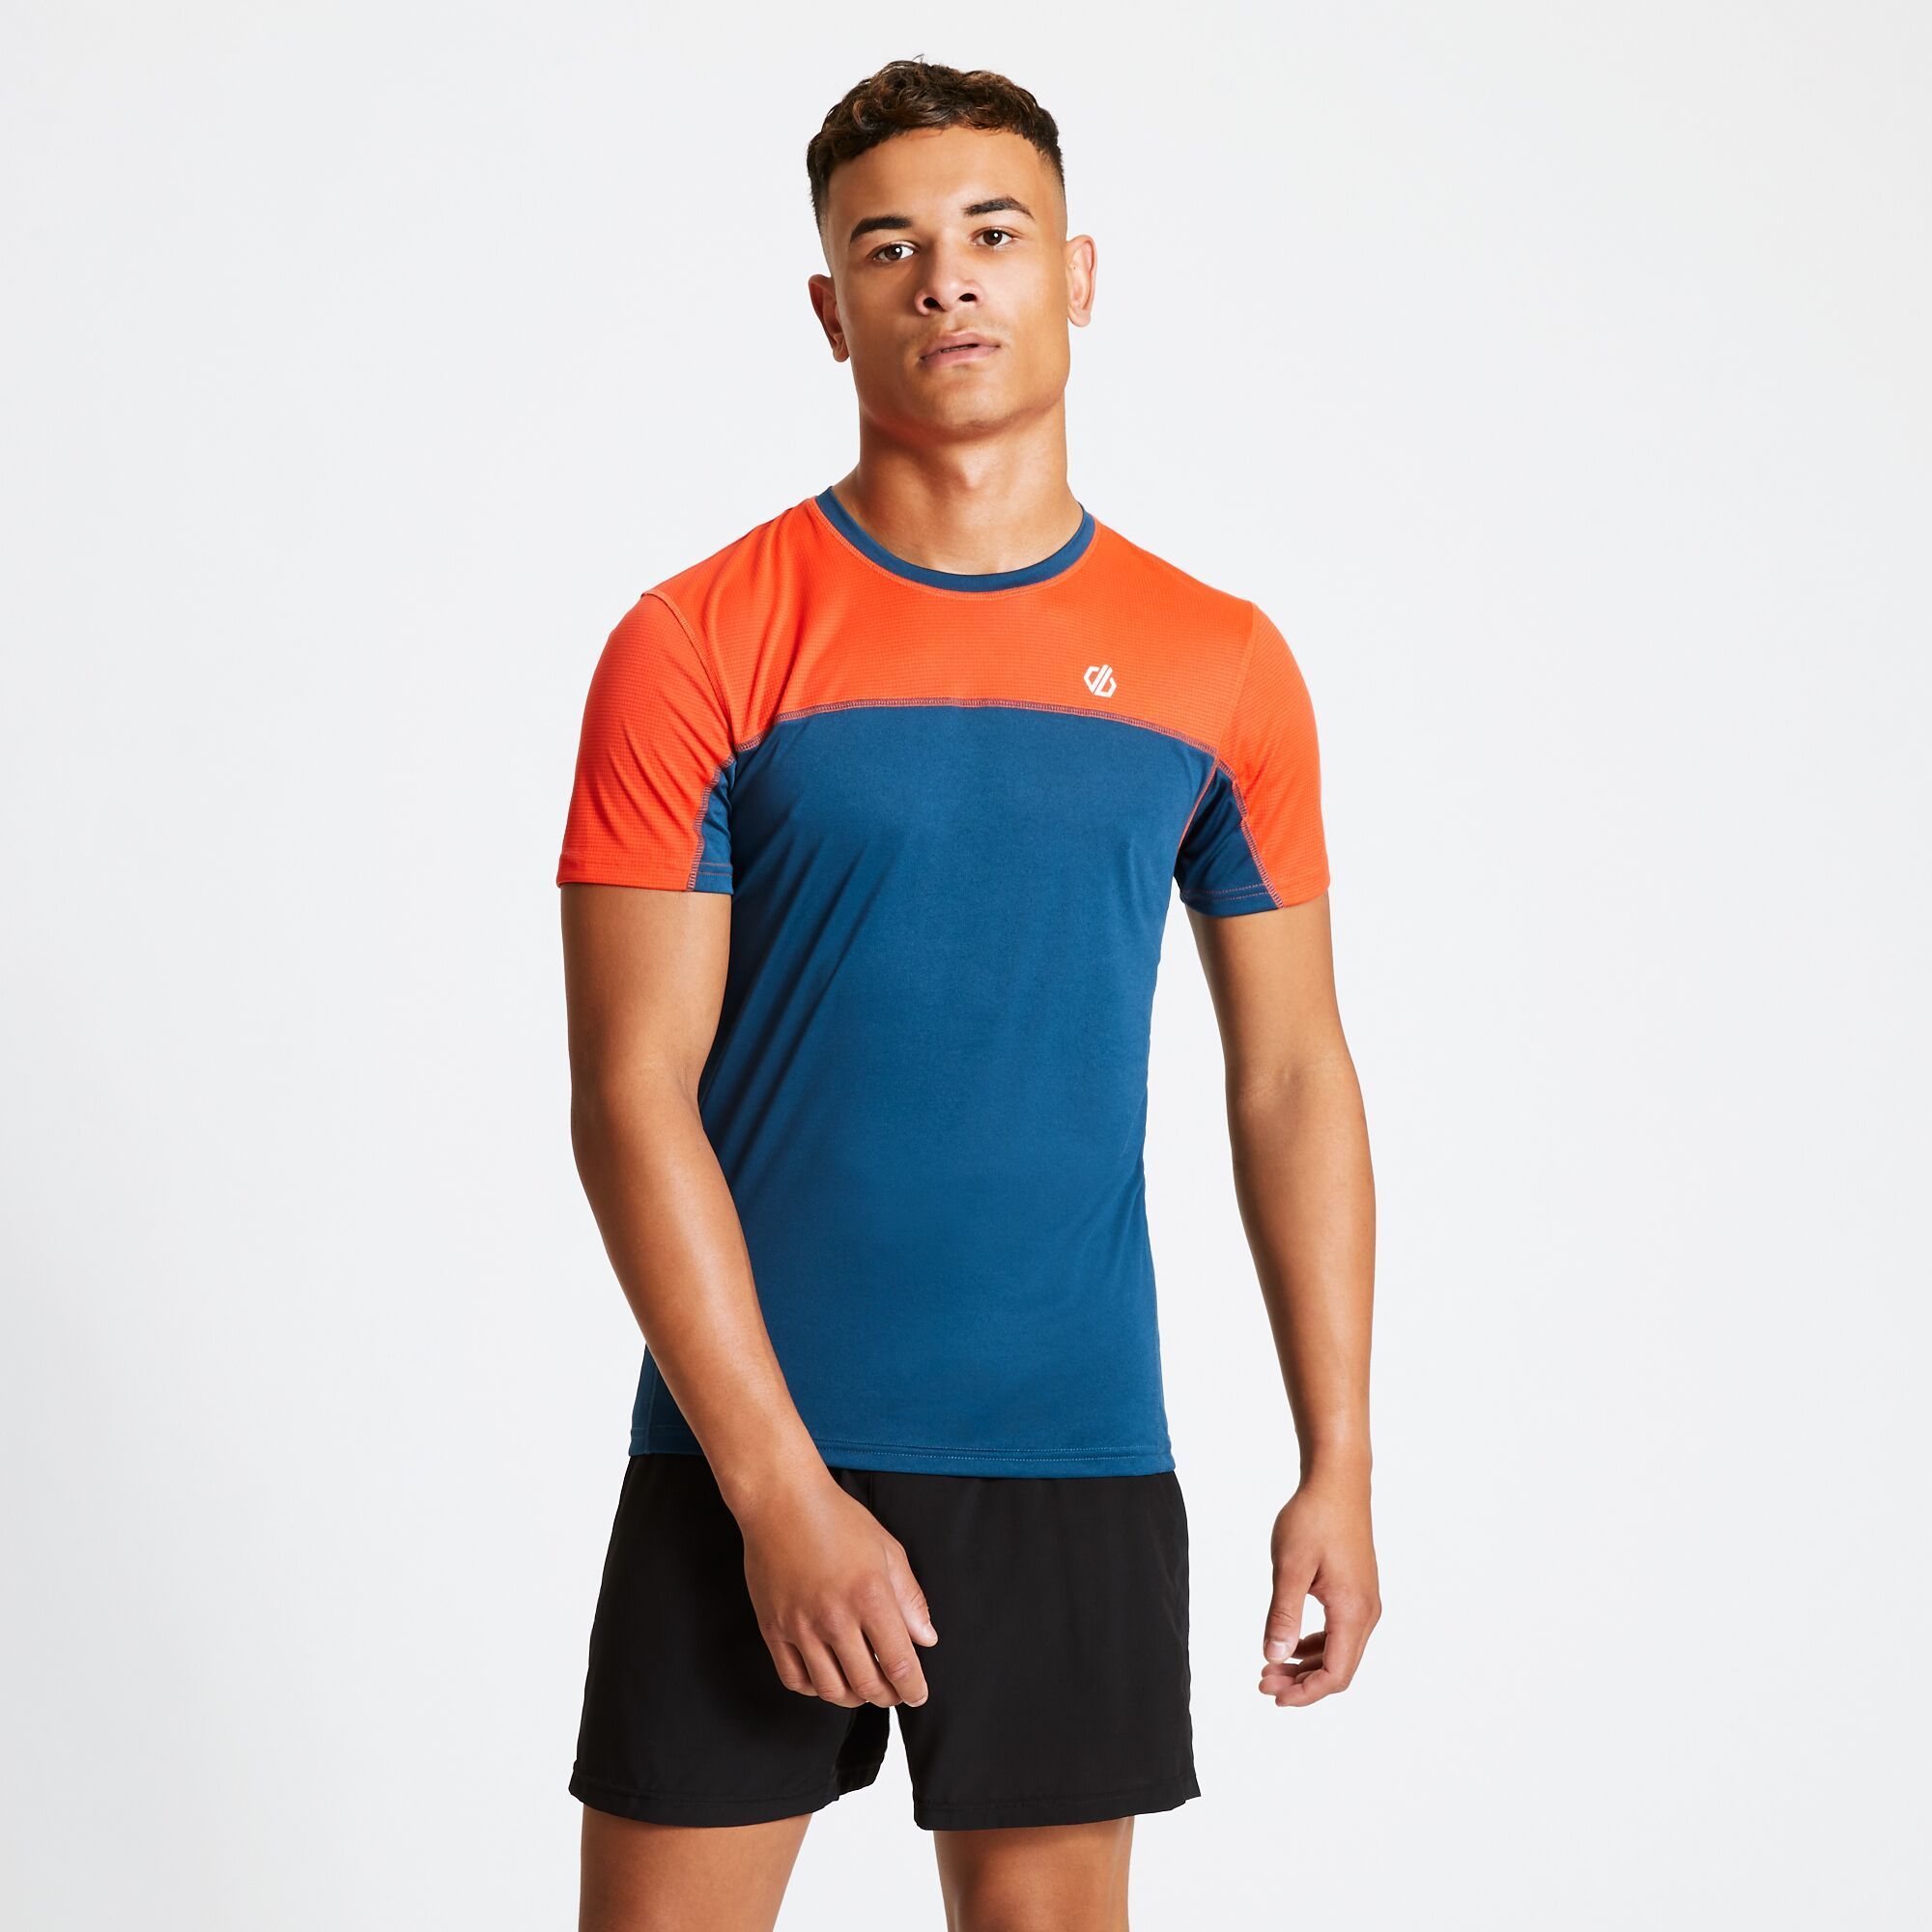 Material: 100% Polyester (Q-Wic lightweight polyester fabric).   Soft, lightweight and form fitting short sleeved t-shirt. Ideal warm-weather companion for jogging, squat-jumping or hiking. Features a mesh panel across the shoulders. Reflective Dare 2B logo detail.